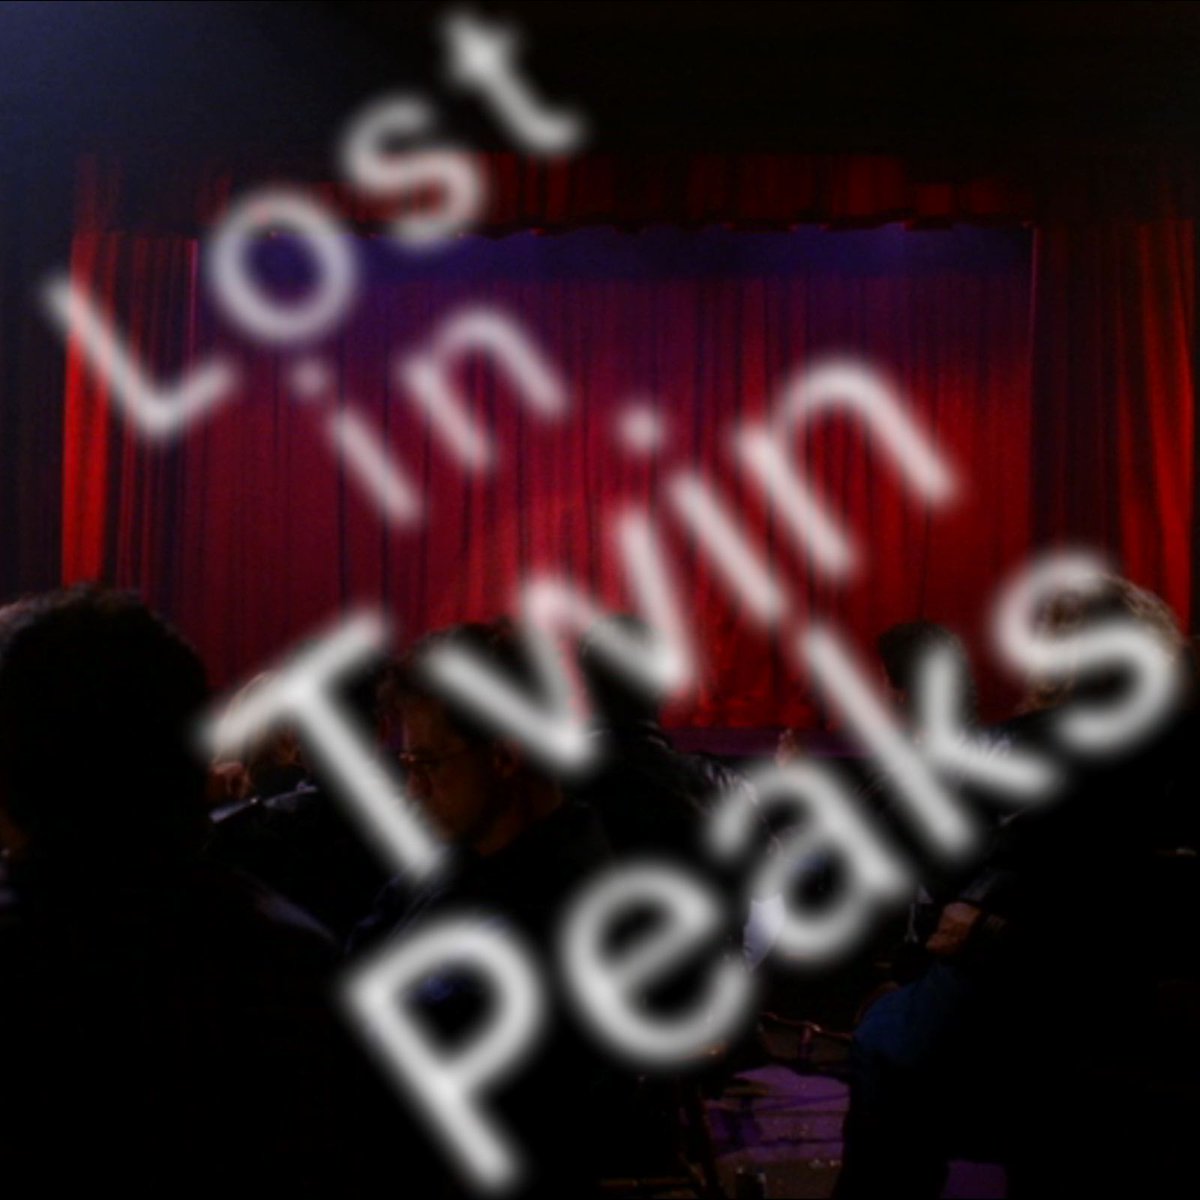 Update: finished 1H, my public podcast episode highlighting Lost in Twin Peaks with samples from that patron podcast.